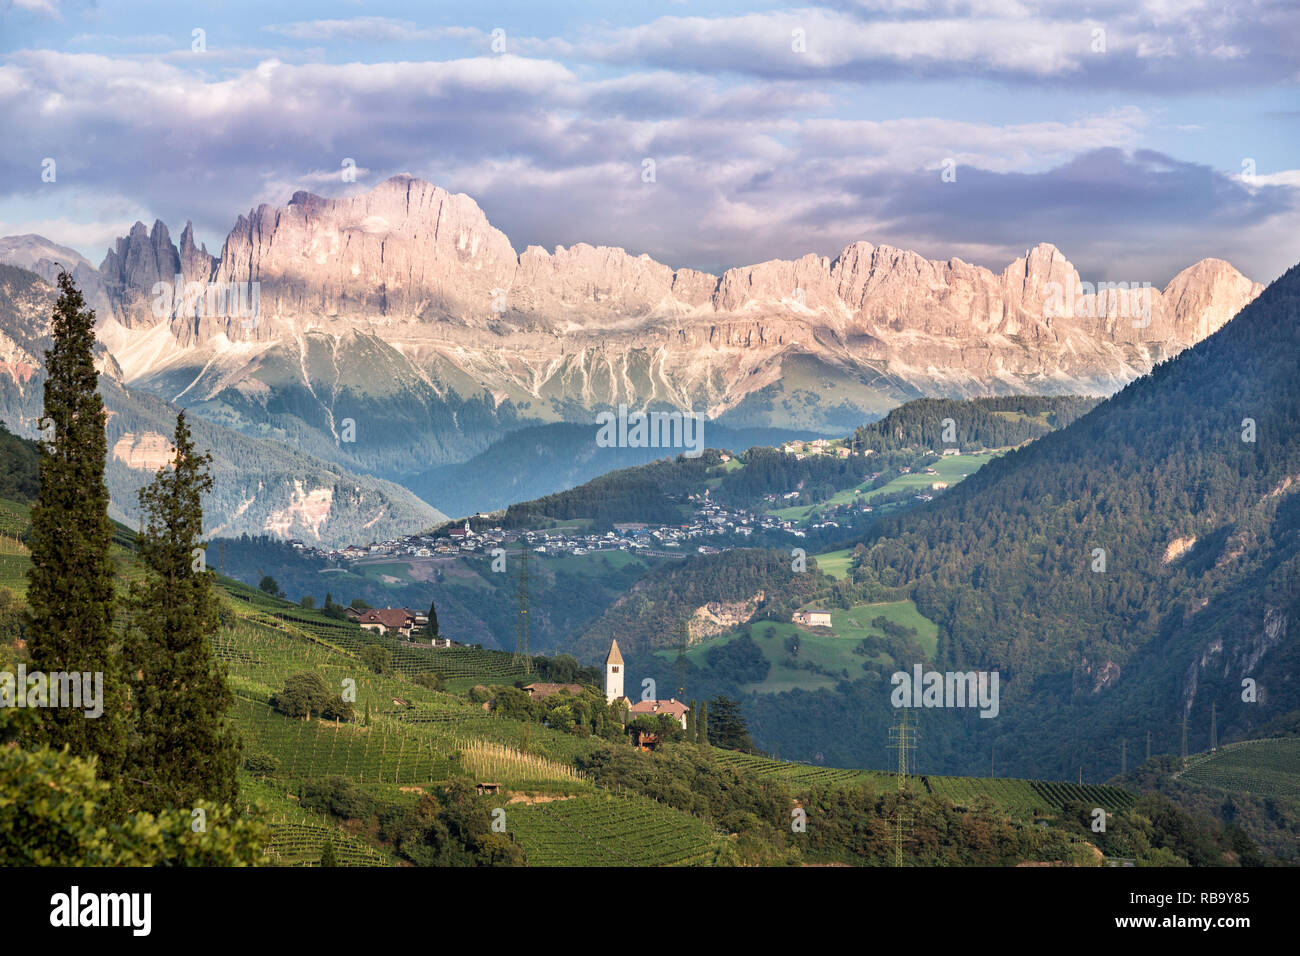 A view to the Rosengarten (in Italian Catinaccio) group in the Dolomites, part of the Alps. Clouds casting shadows. Stock Photo